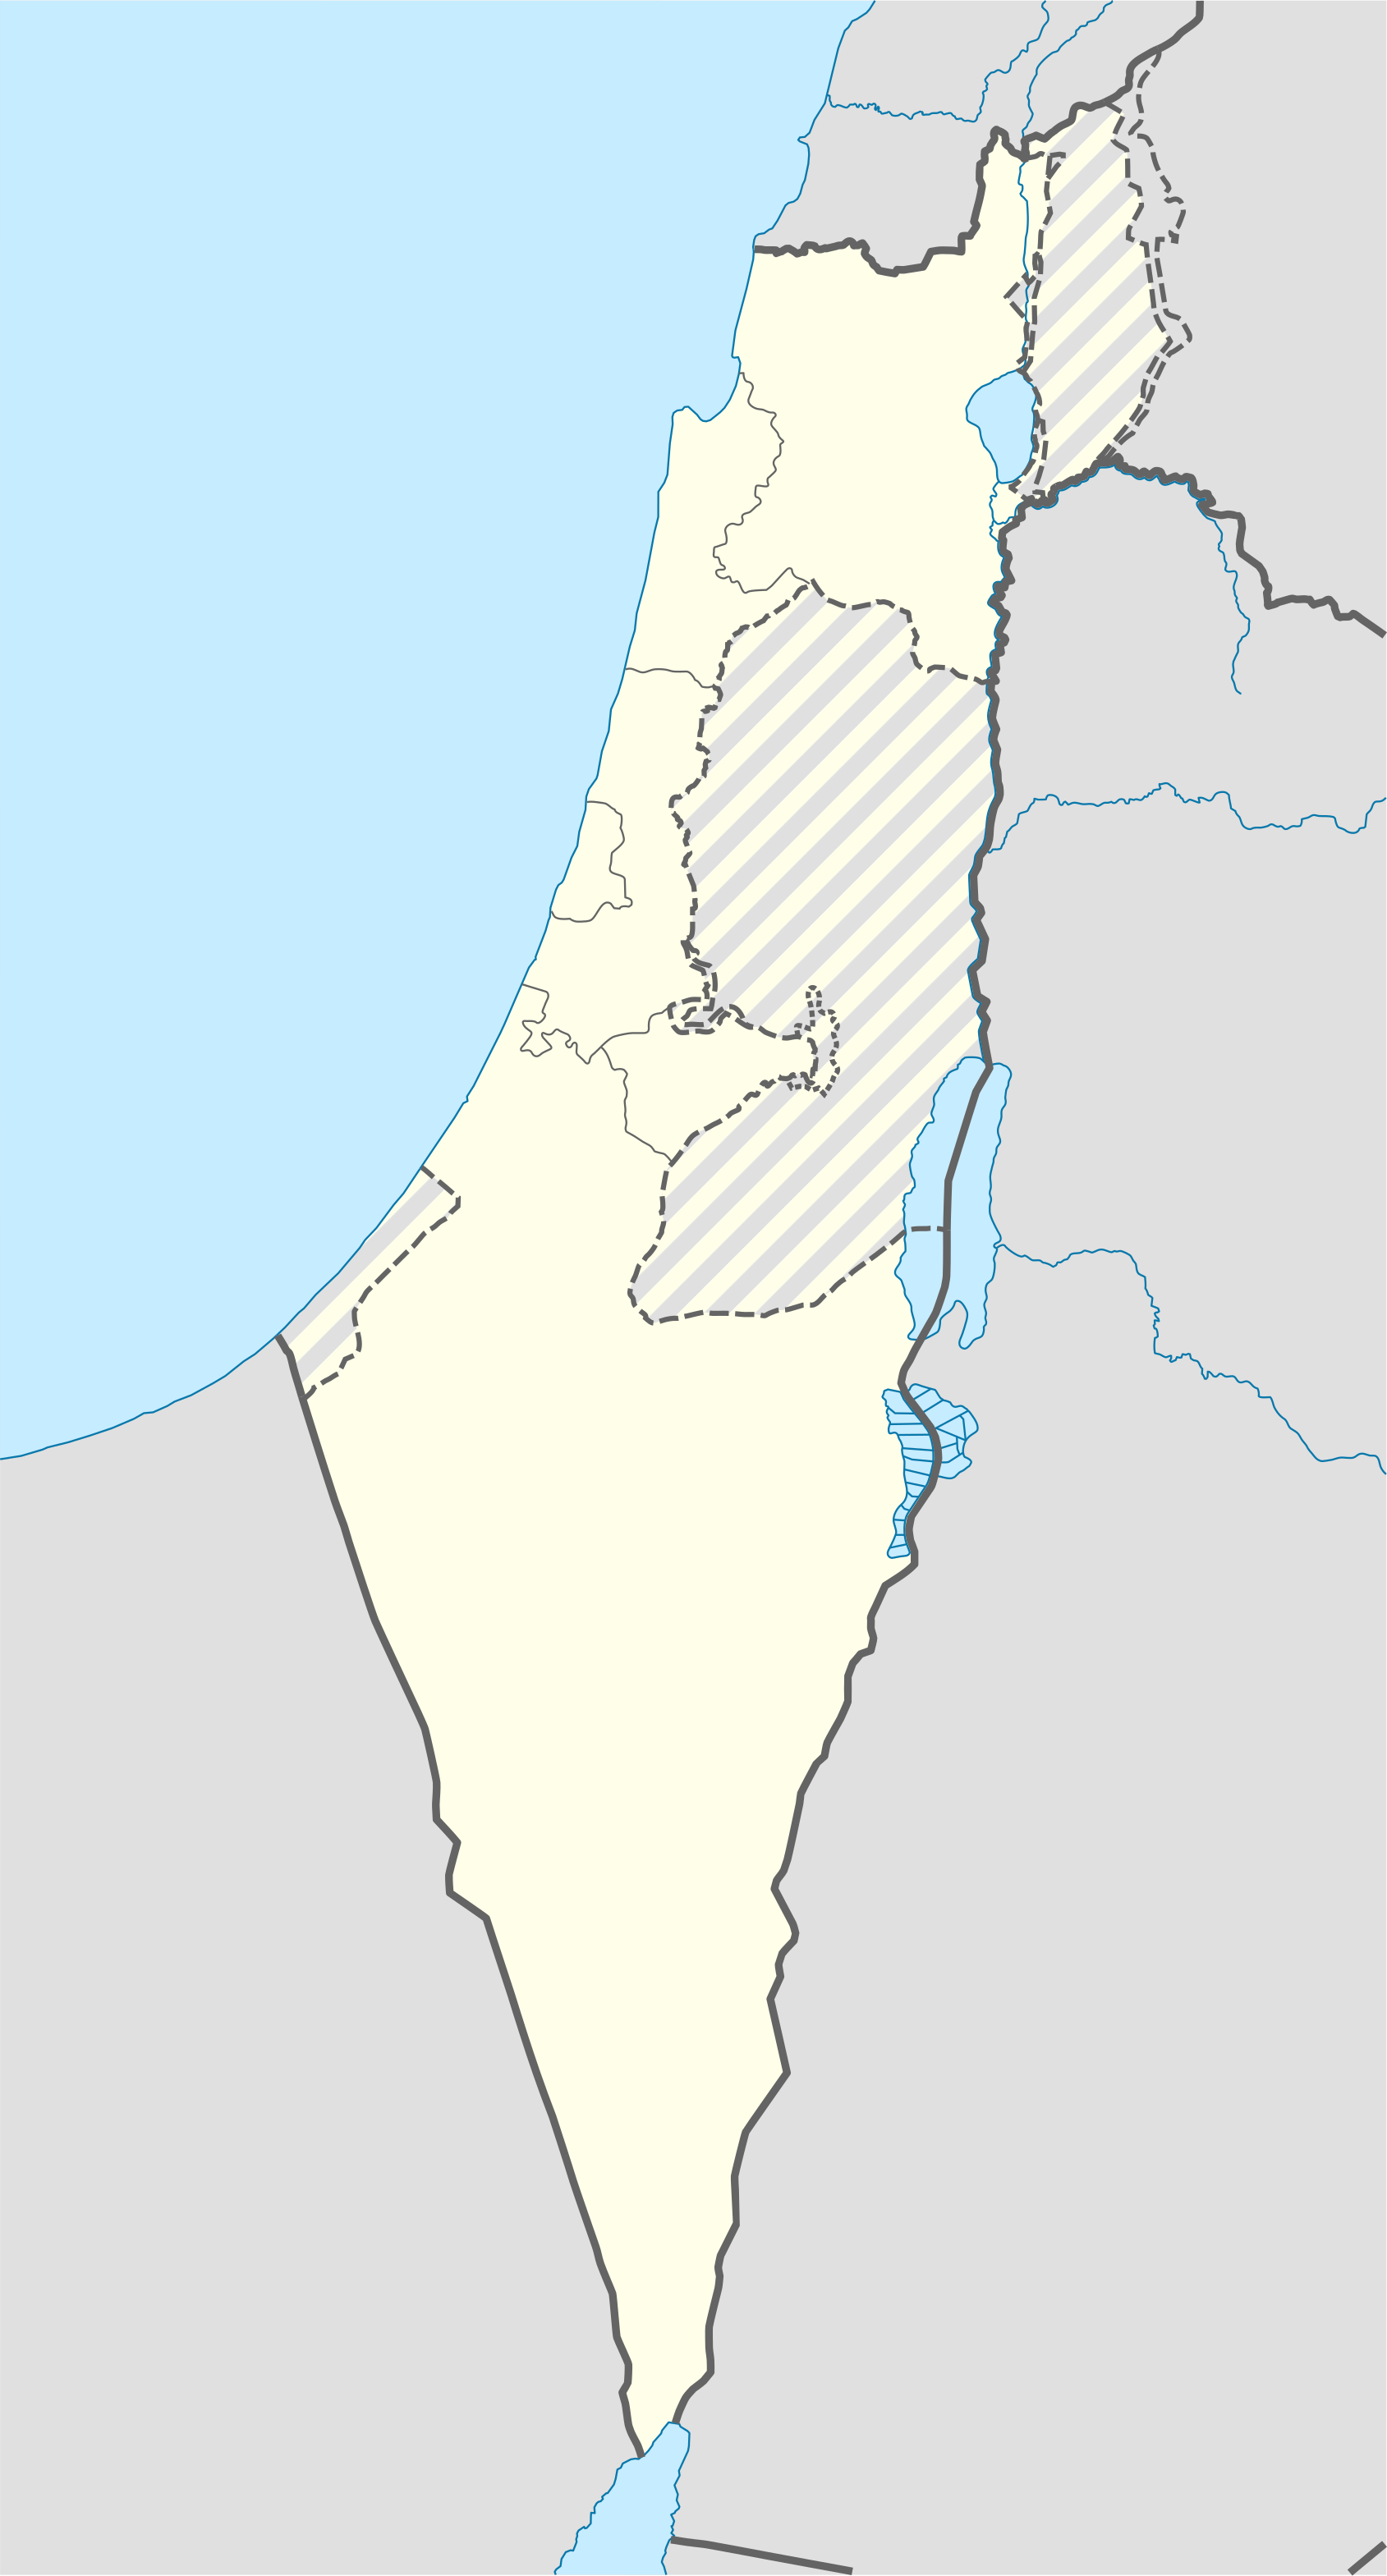 Israeli-Palestinian conflict detailed map/doc is located in Israel